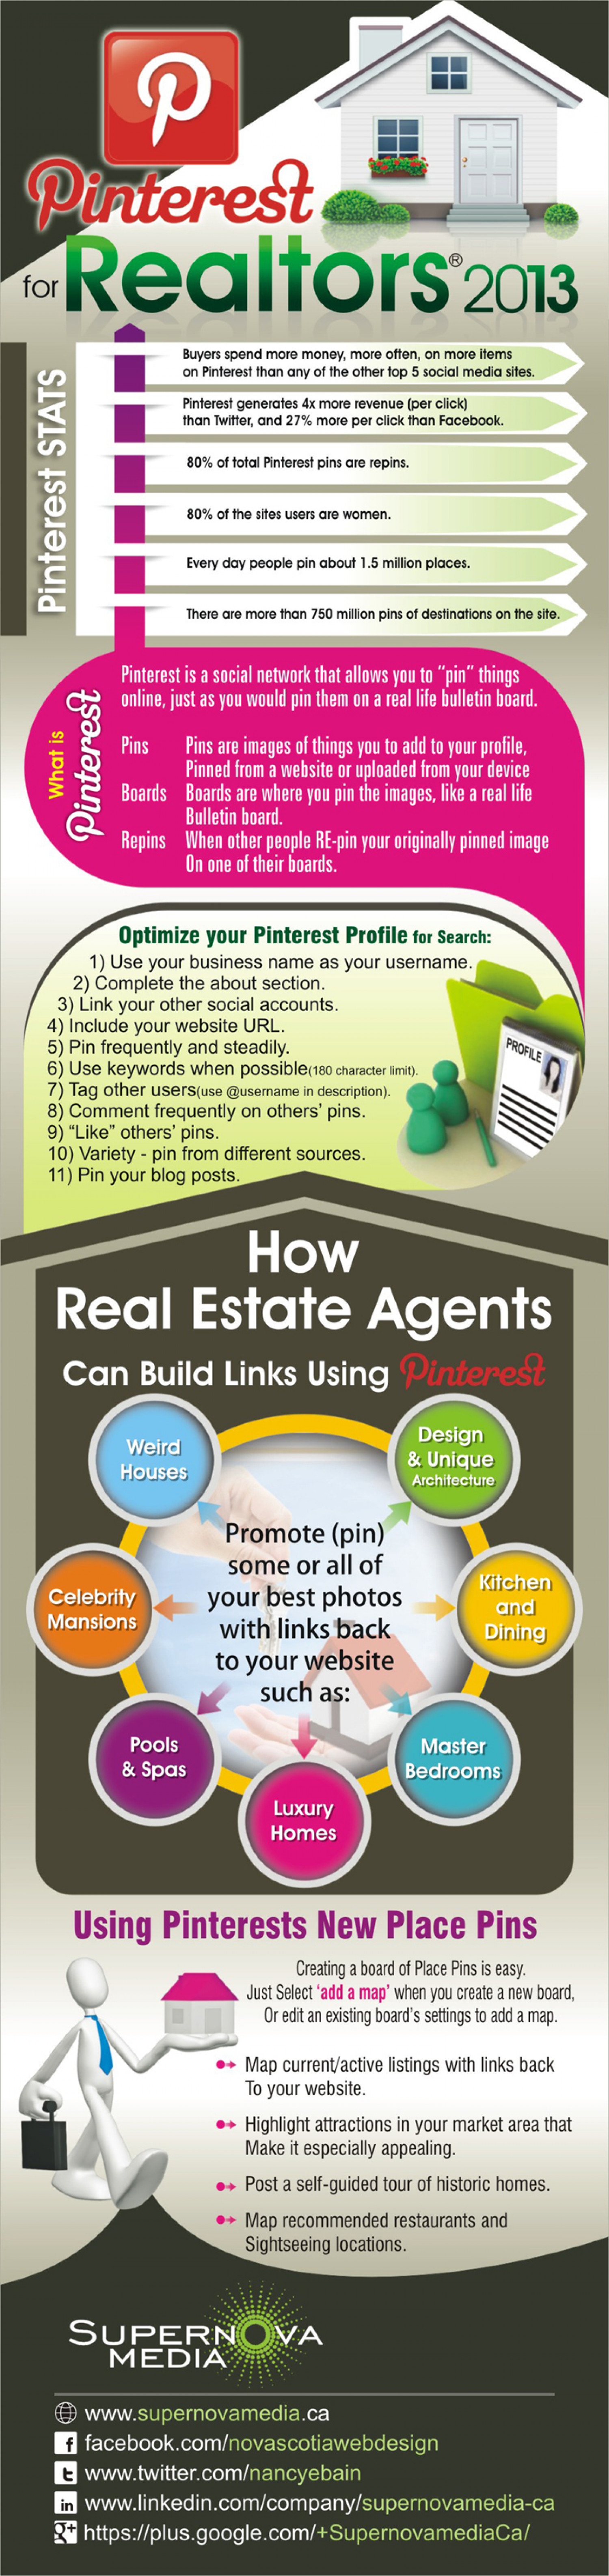 Pinterest for Real Estate Agents Infographic